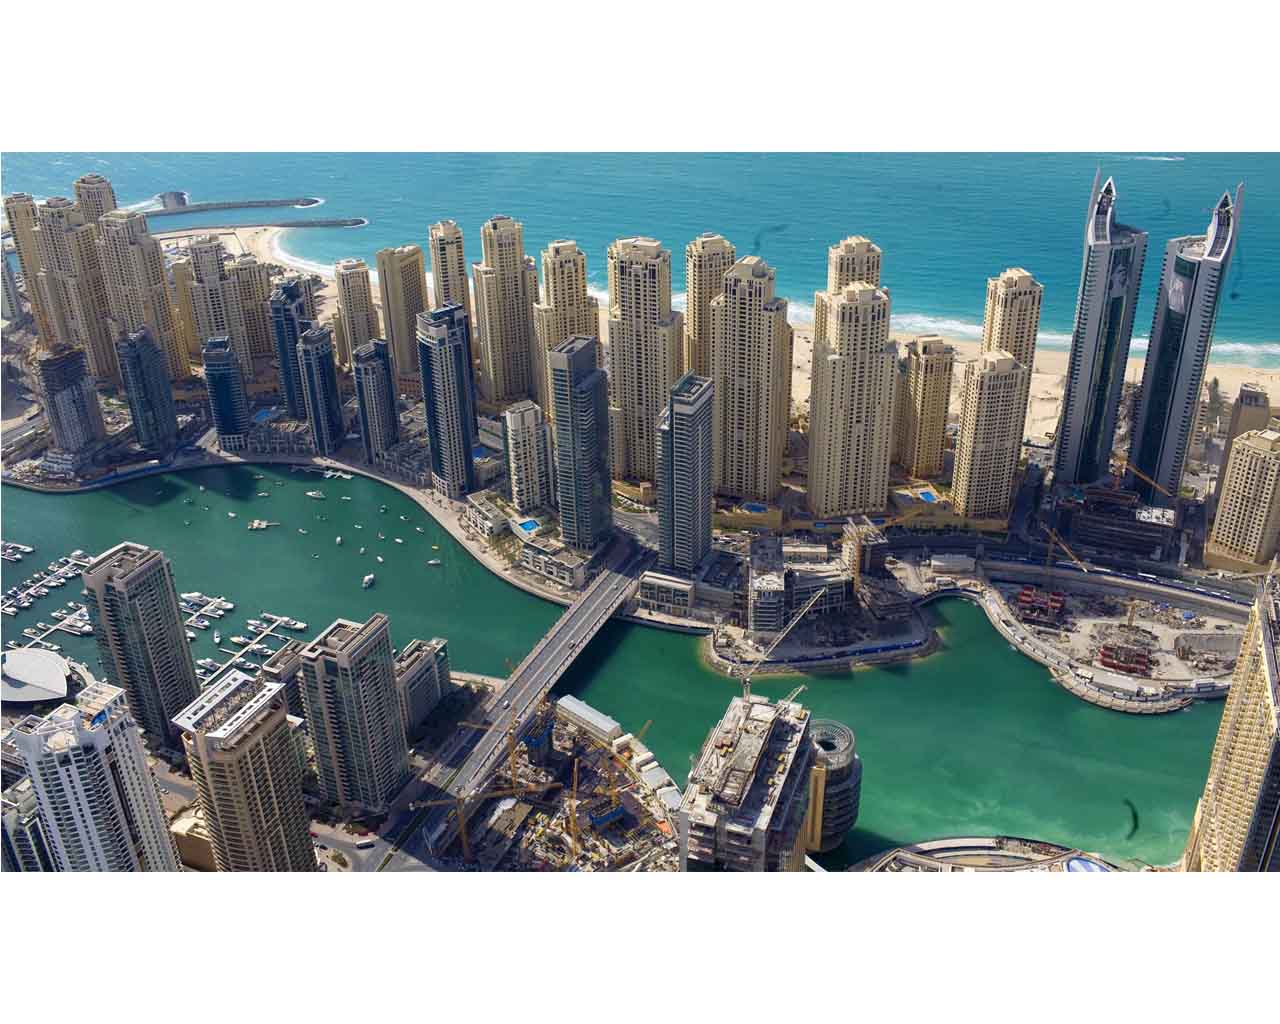 Thoughts of an Expatriate in Dubai by Loy Machedo | Loy Machedo